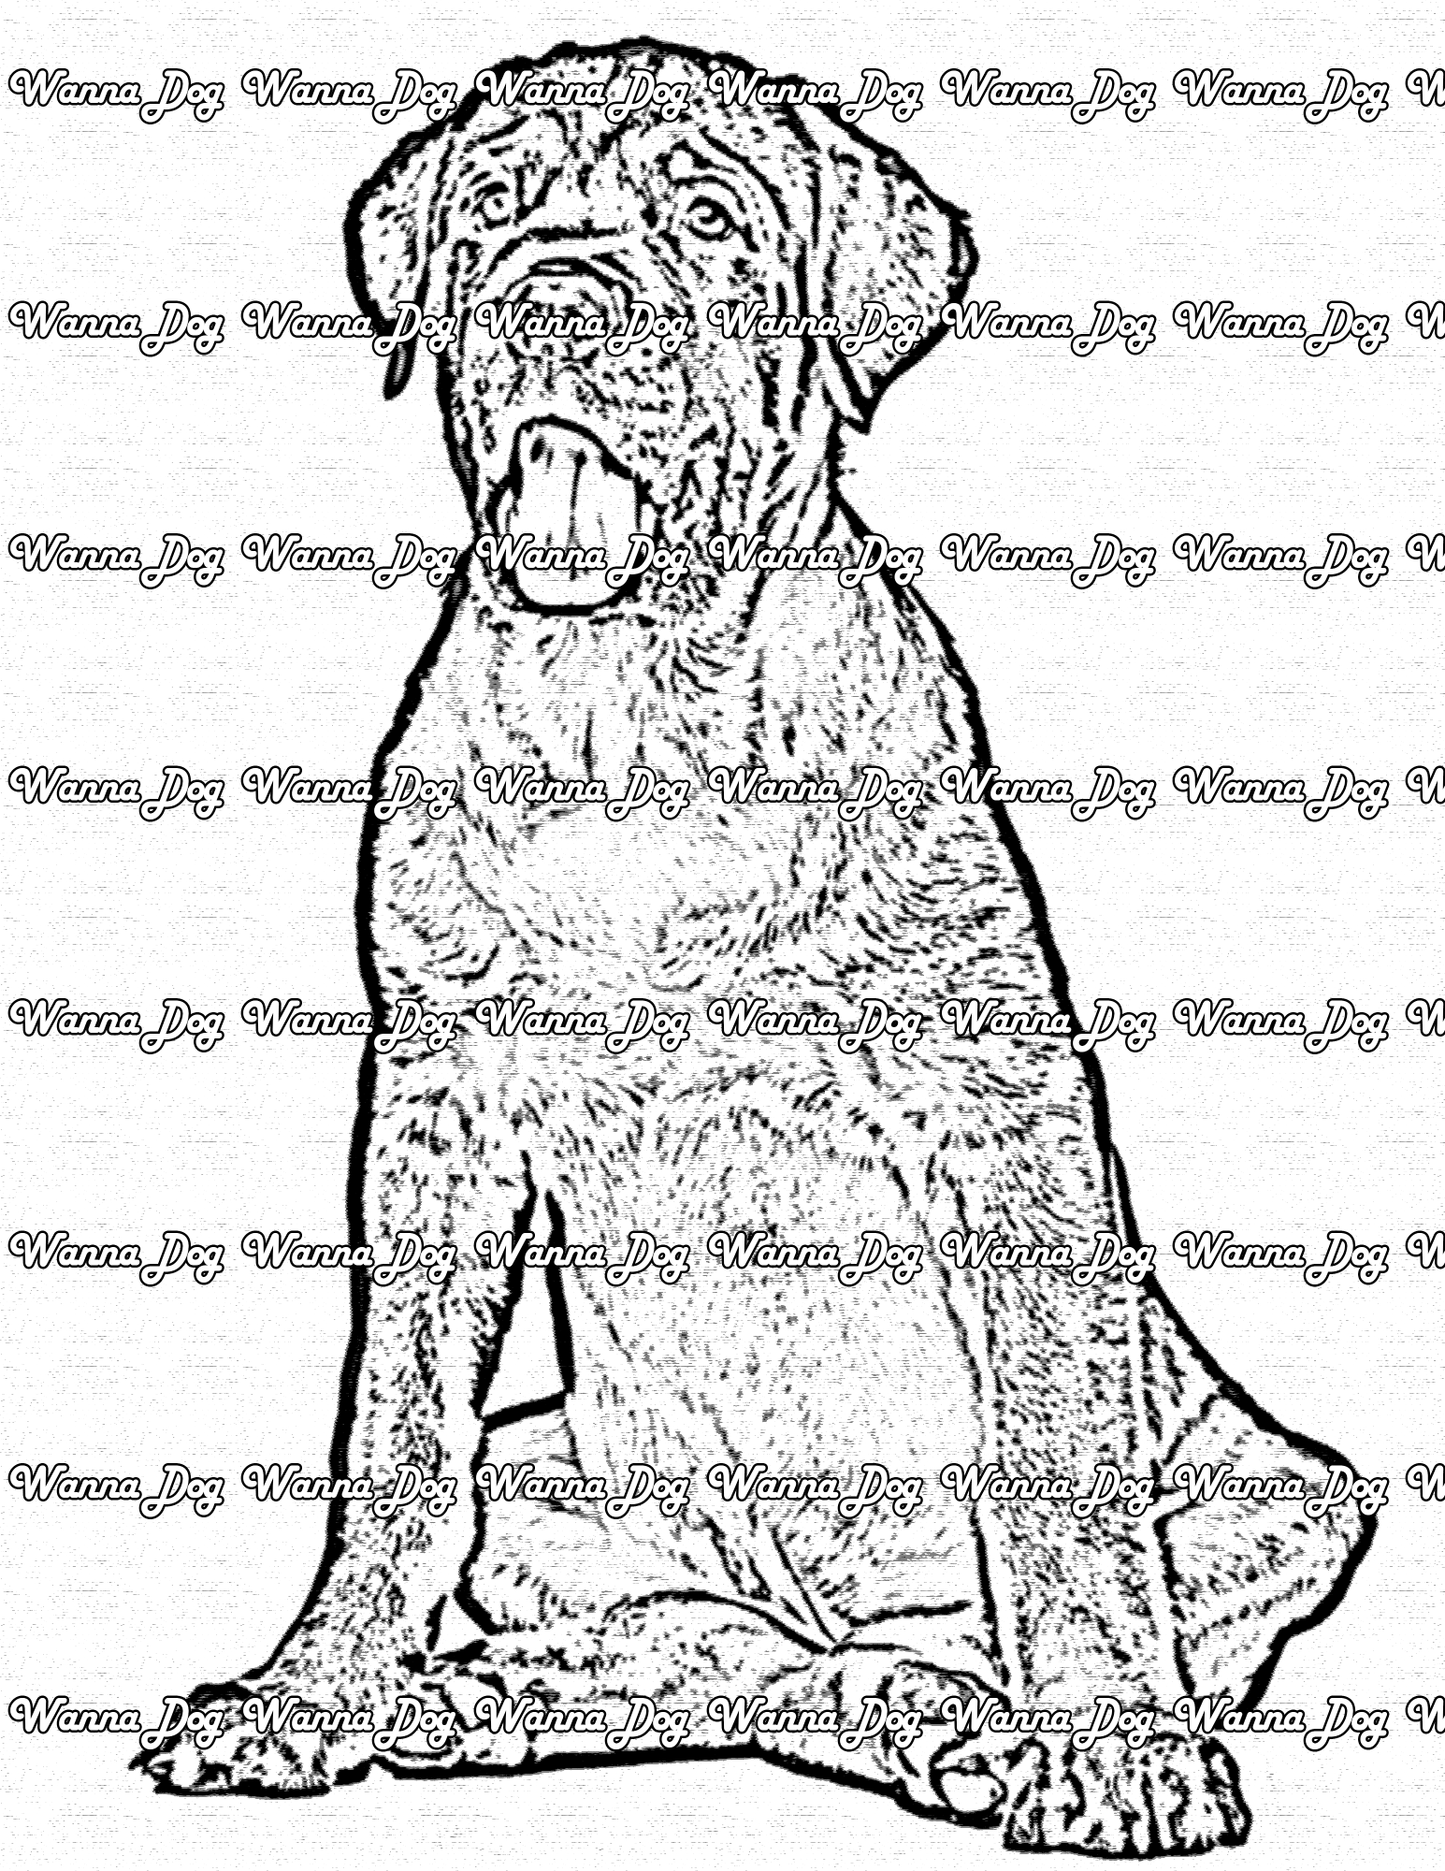 Rottweiler Coloring Page of a Rottweiler sitting with their tongue out